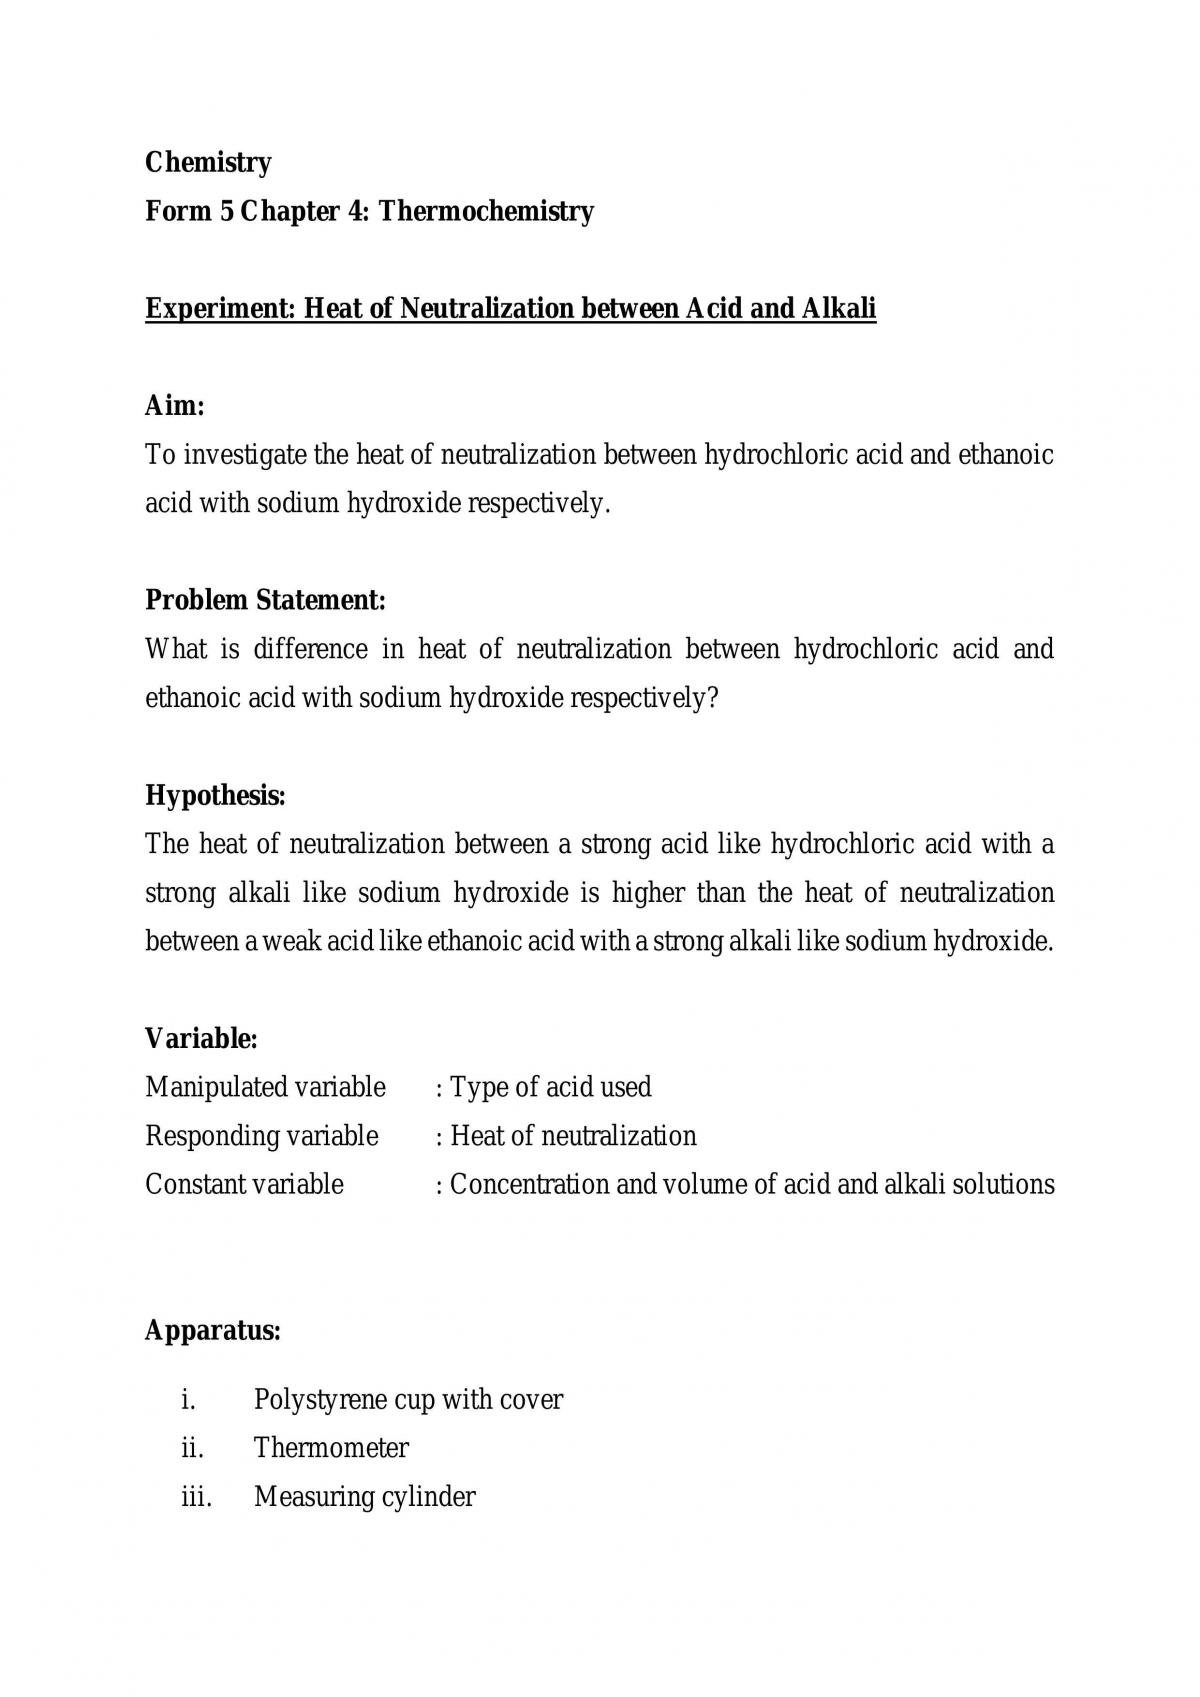 Experiment: Heat of Neutralization between Acid and Alkali - Page 1